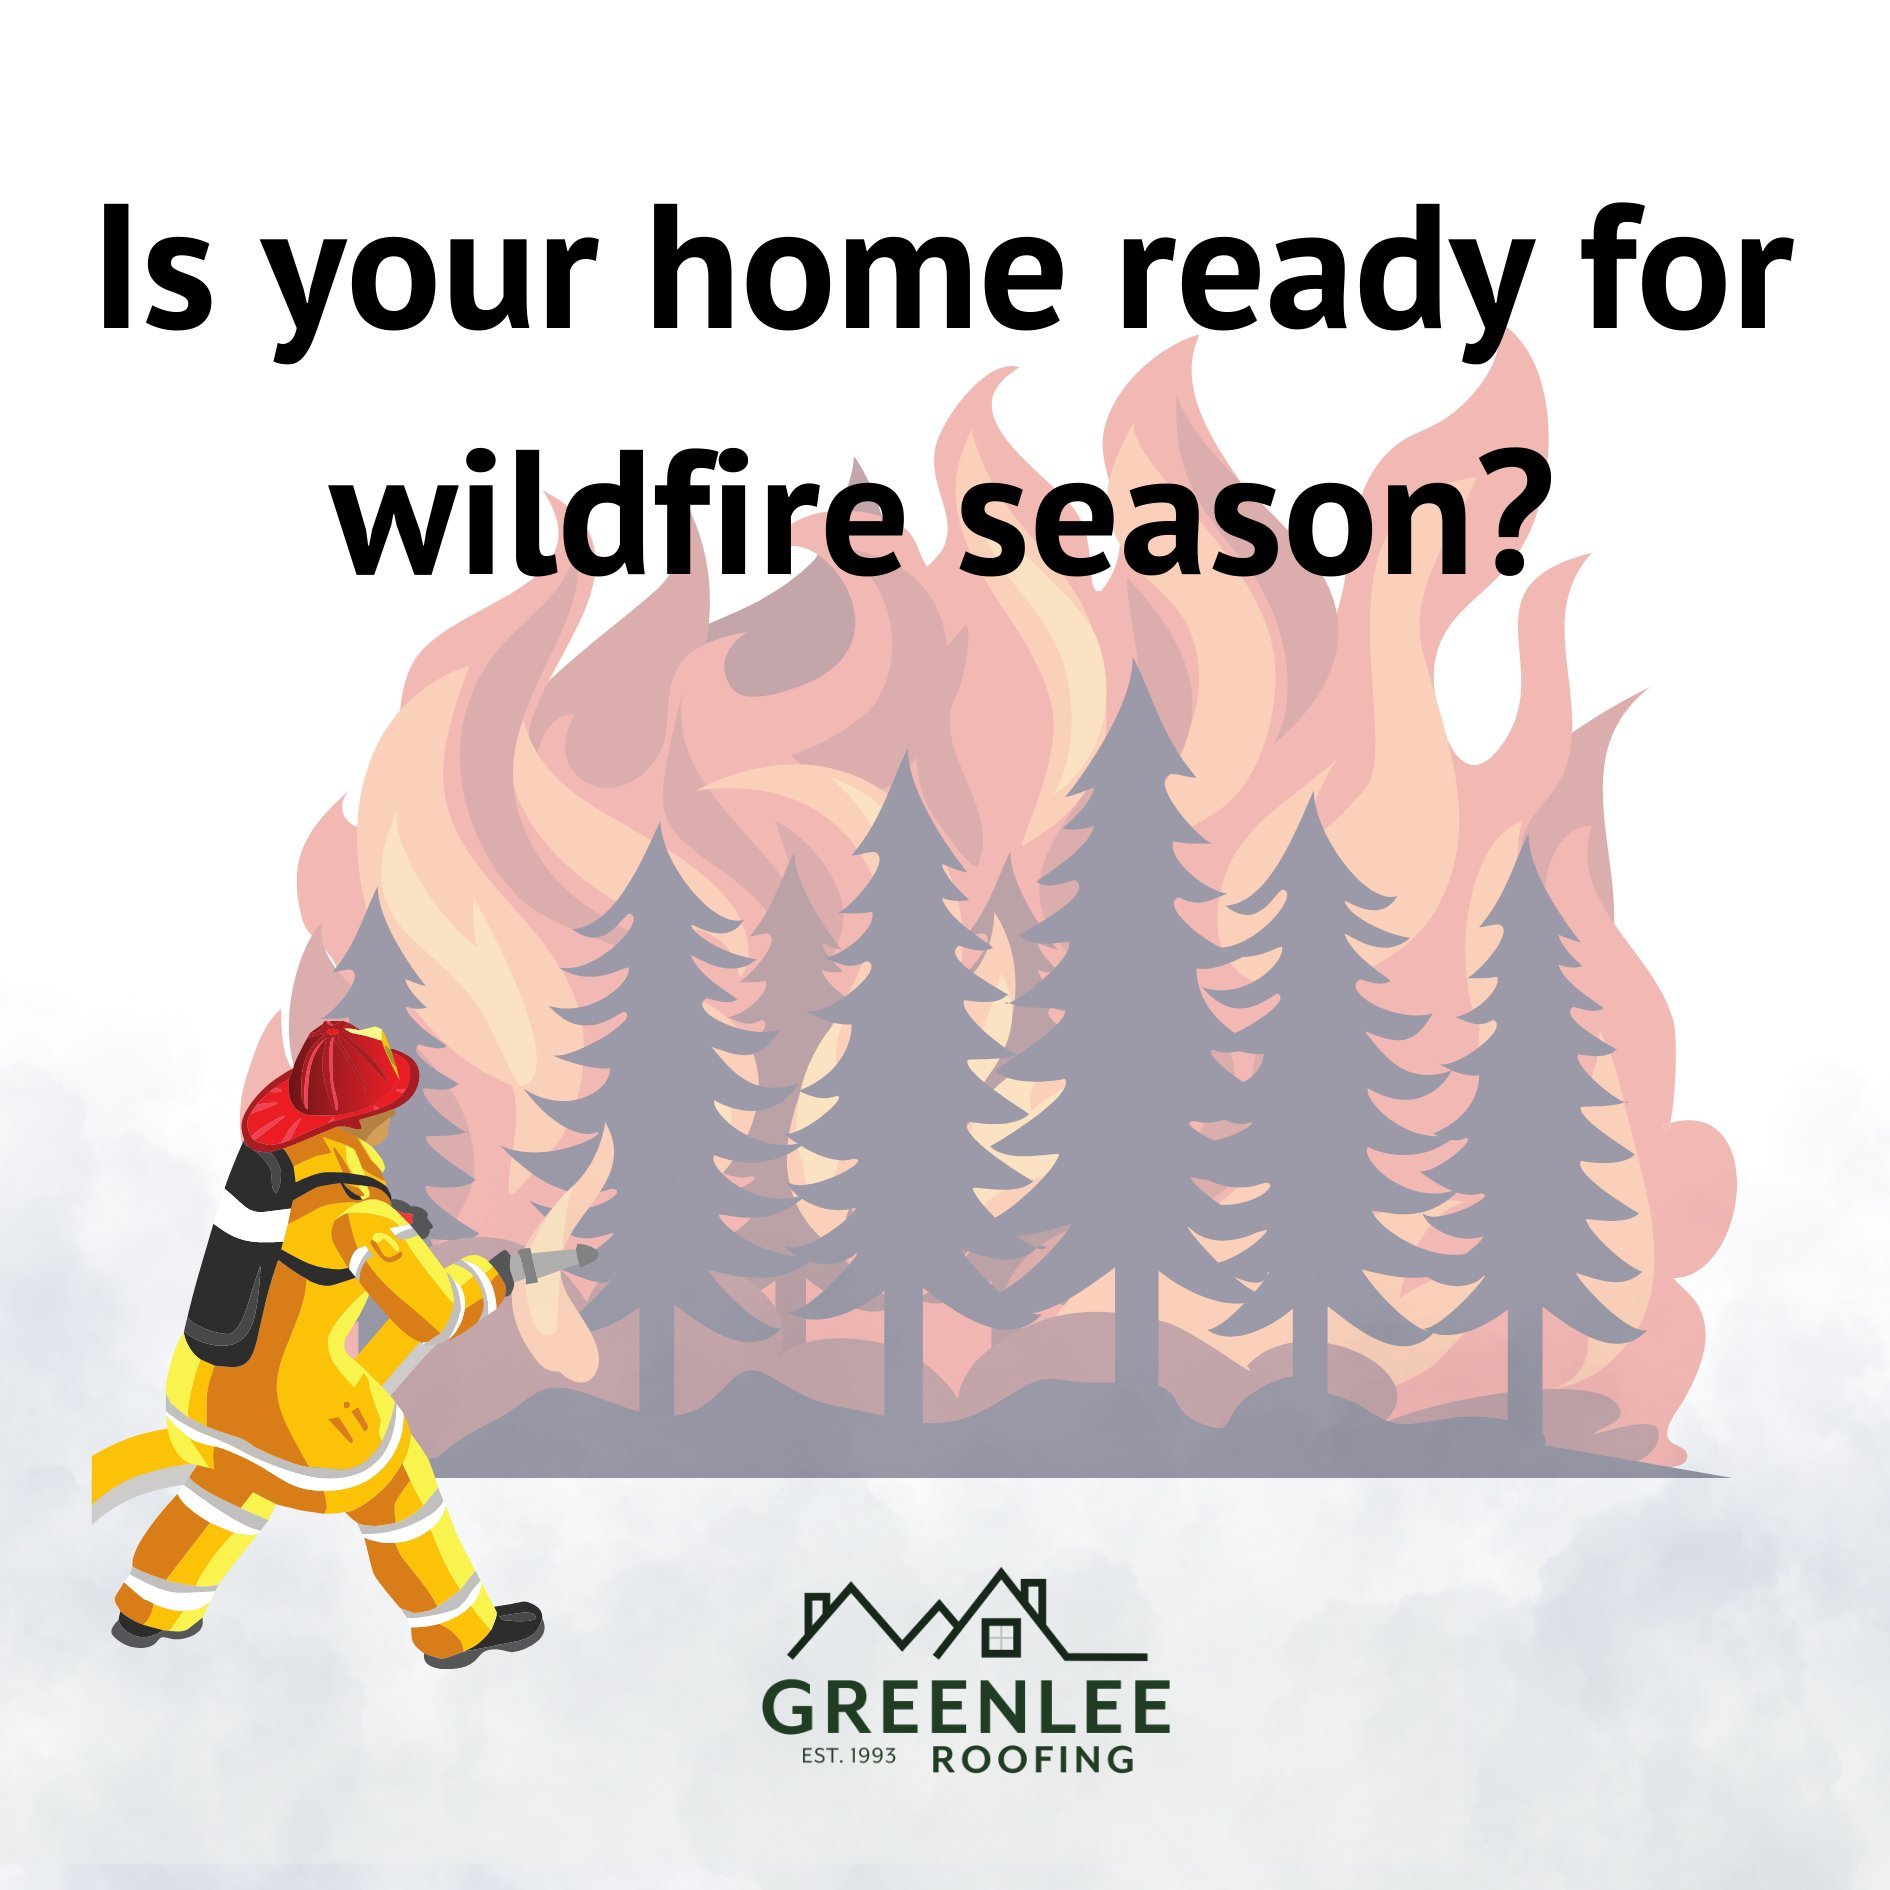 May is Wildfire Community Preparedness month. With many of our homes in Central Oregon being in close proximity to the surrounding forests it is important to consider the risks of wildfires. 

To prepare for this season take the time to ensure that y